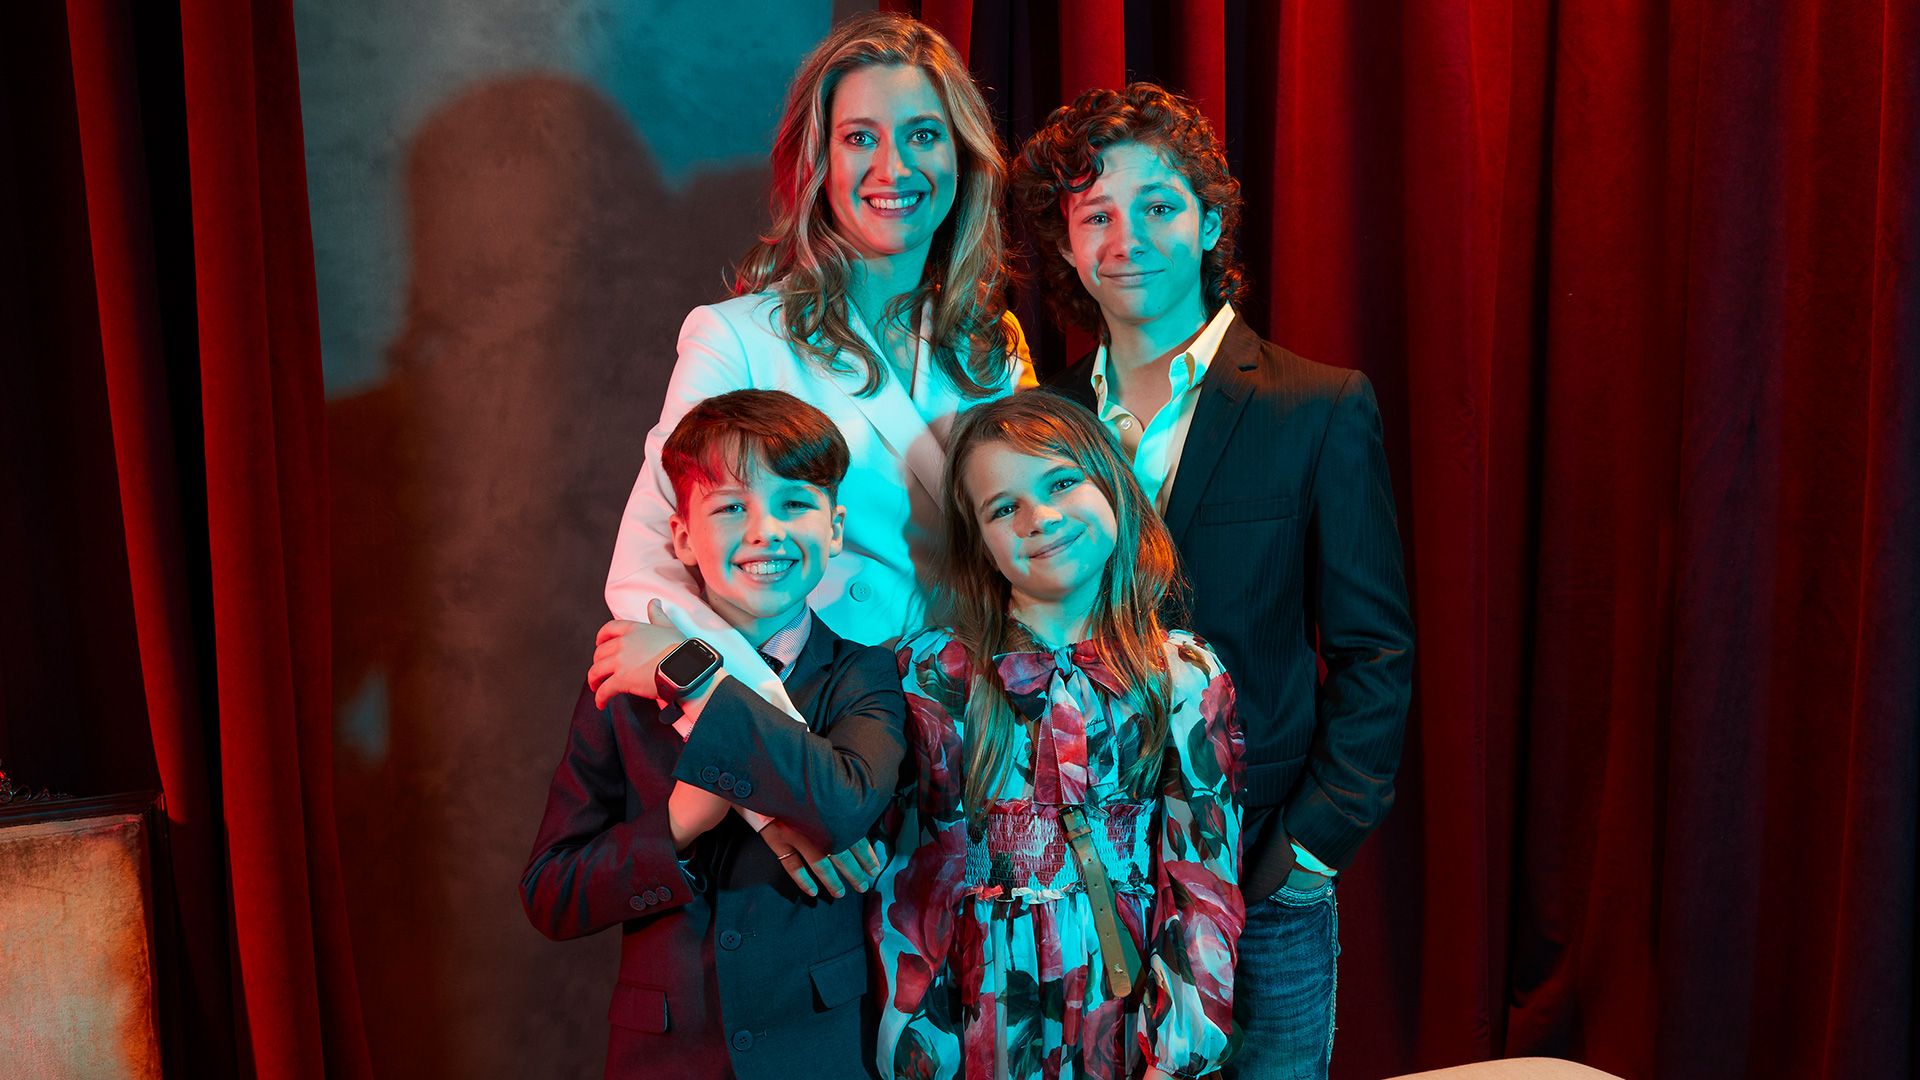 The cast of Young Sheldon stands in front of a red velvet curtain.